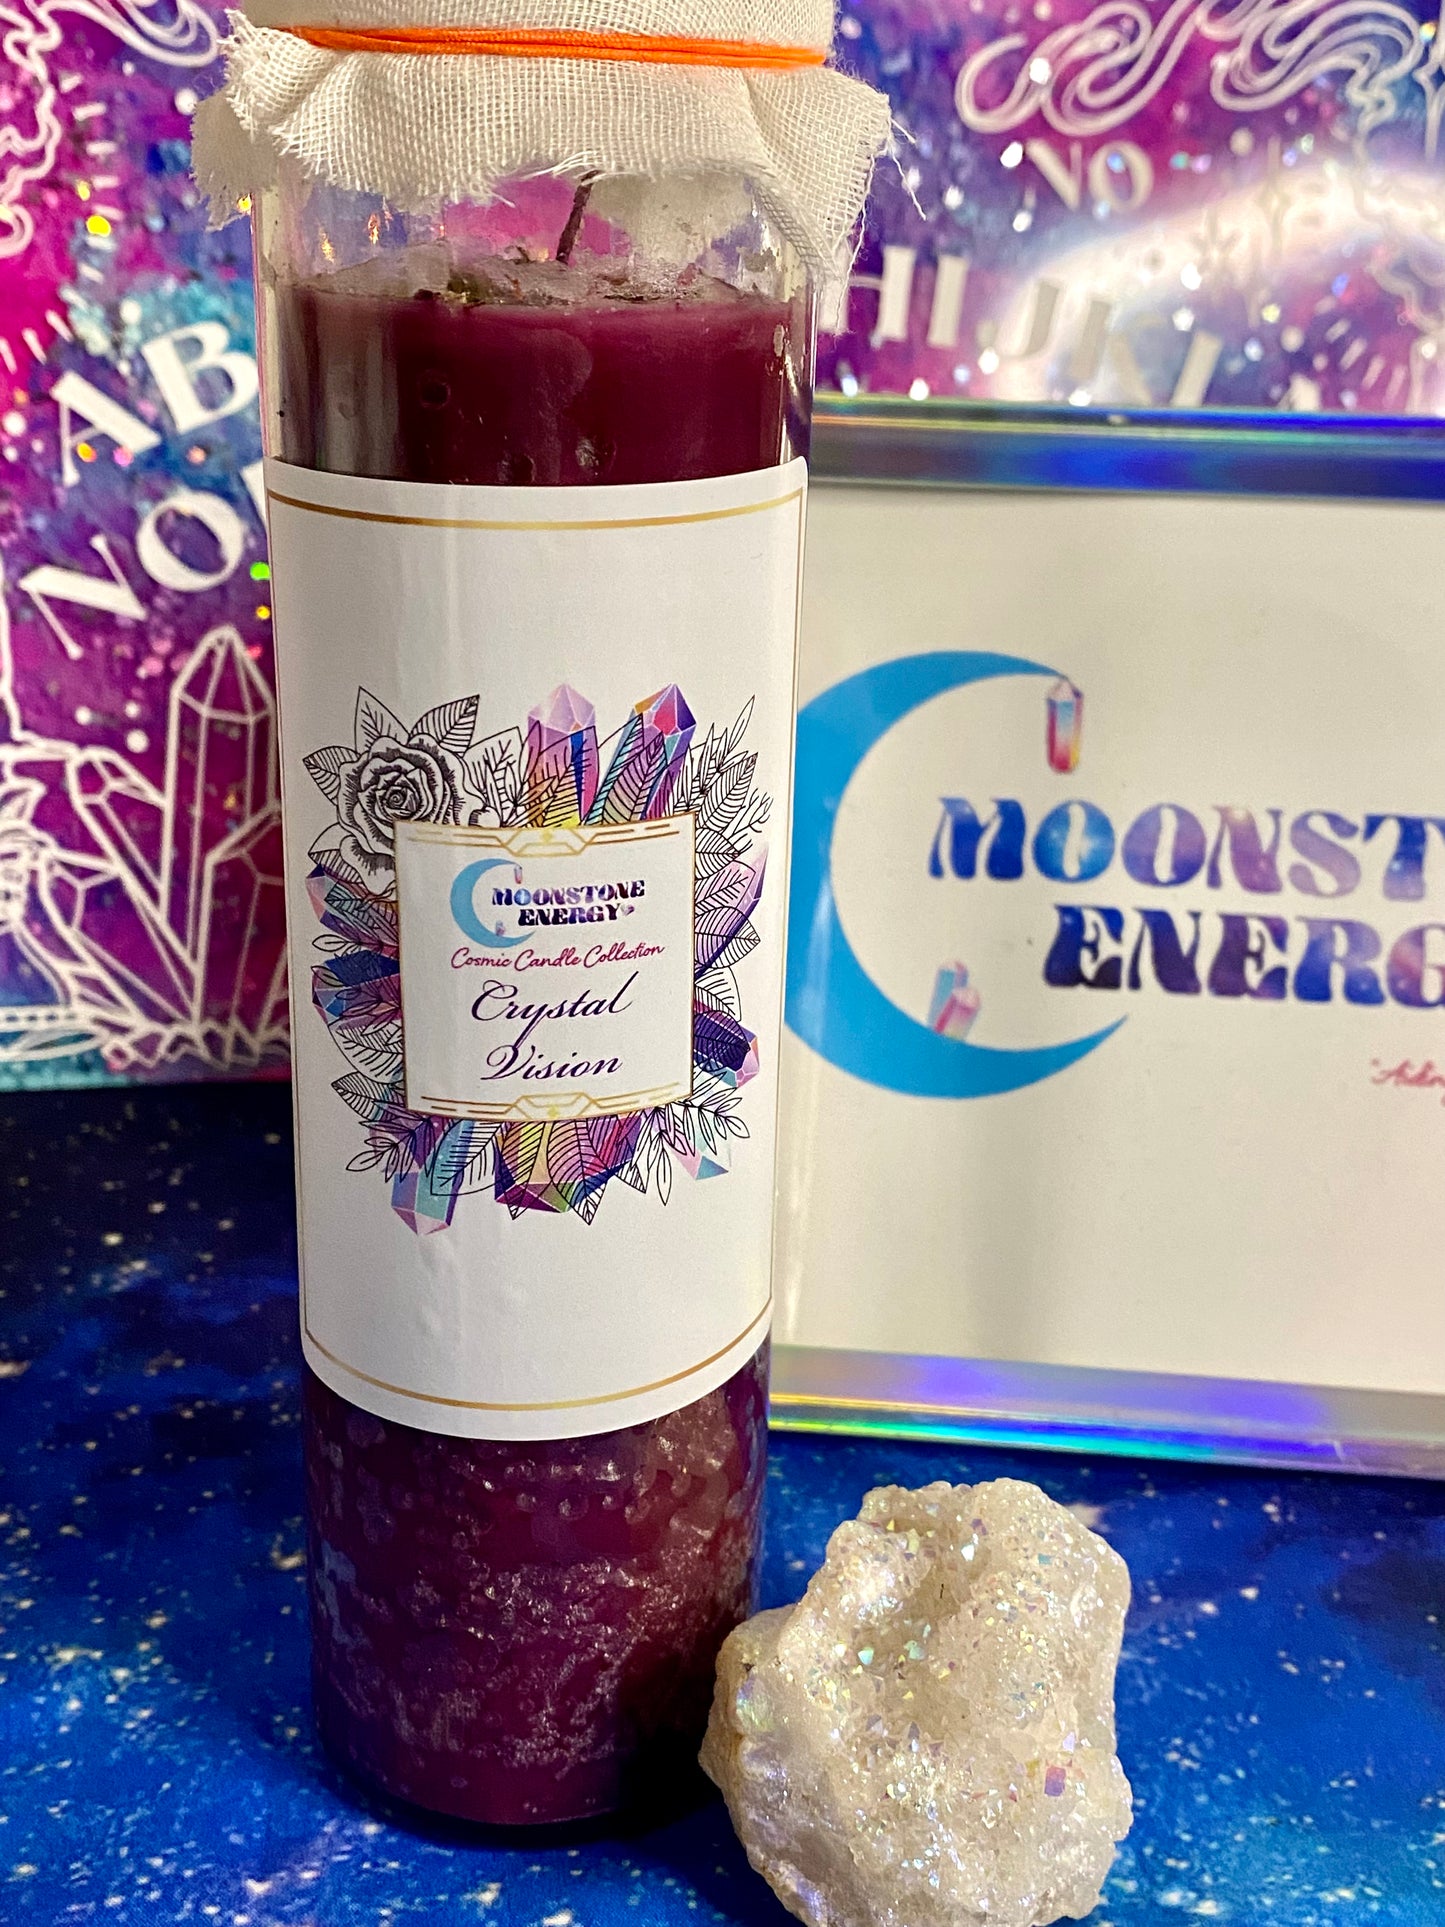 Crystal Vision Candle - Moonstone Energy 